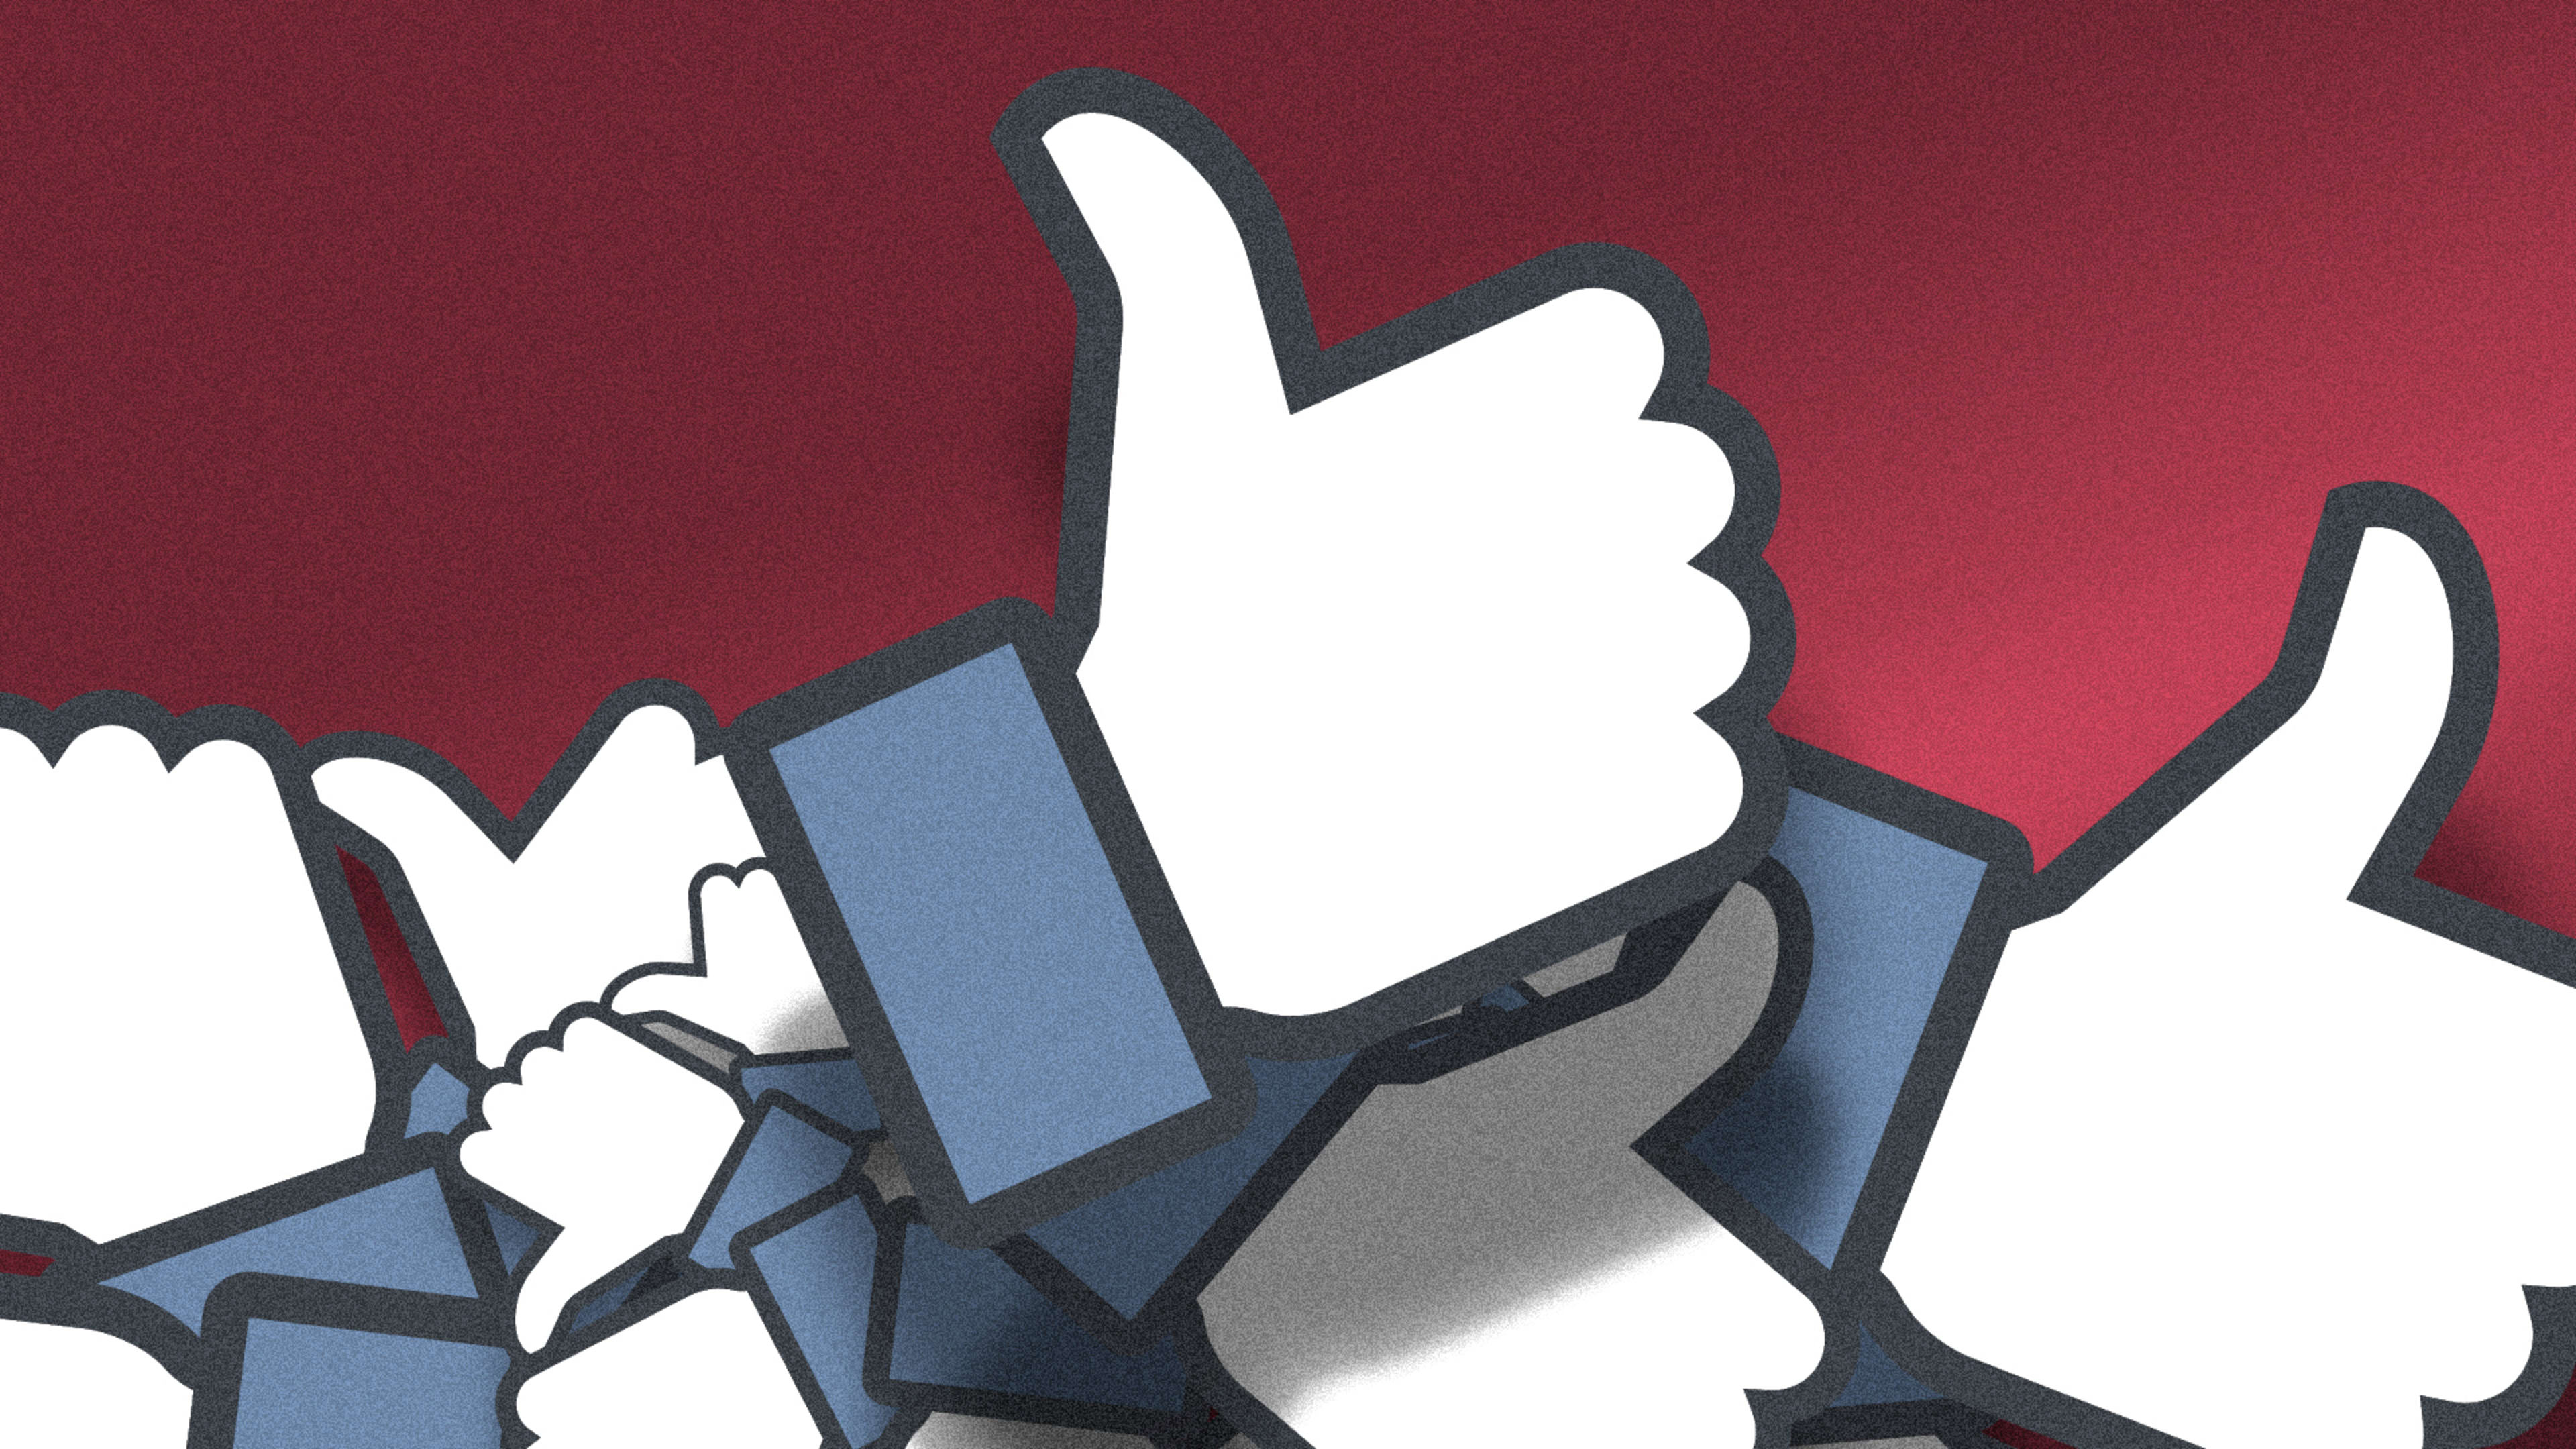 Facebook is learning how to boost online giving